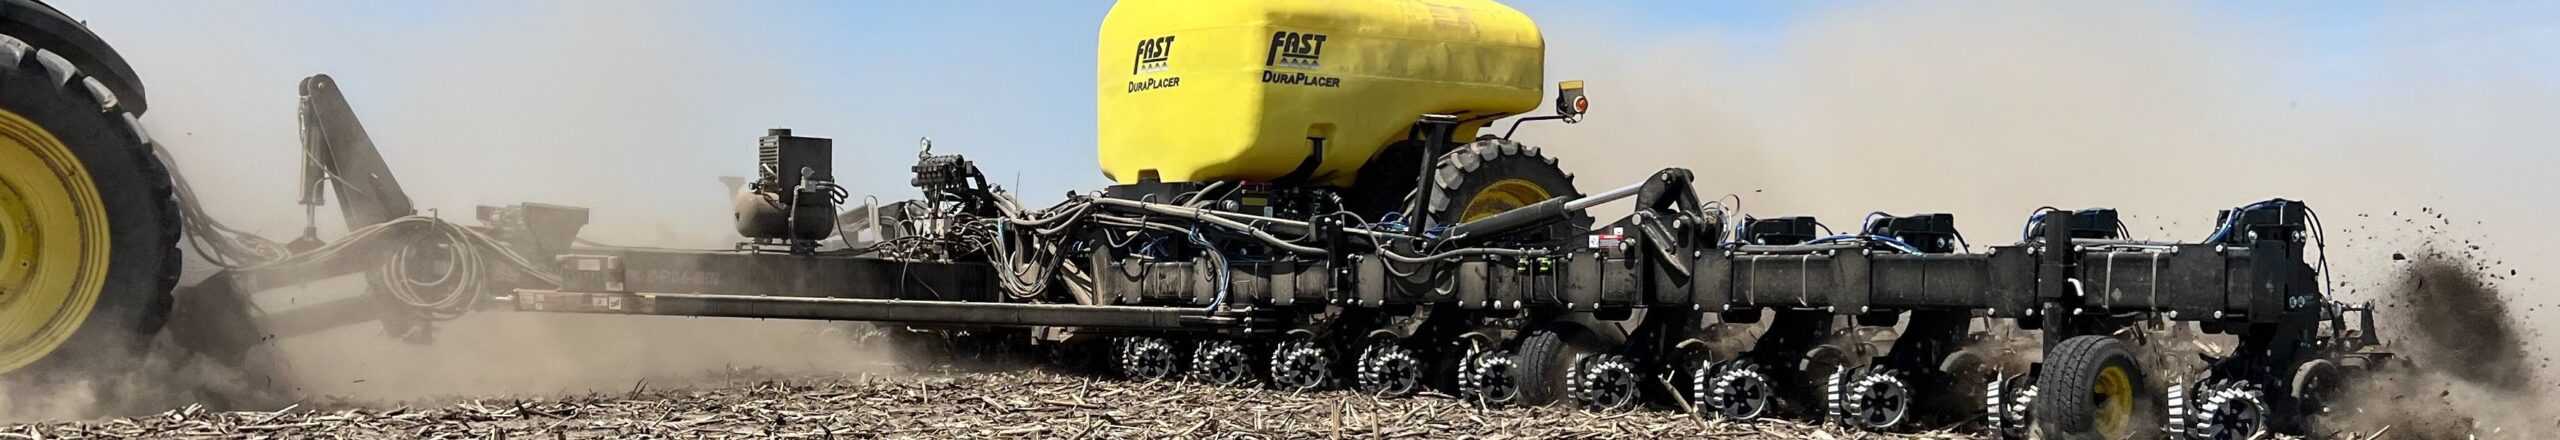 FAST Ag Solutions